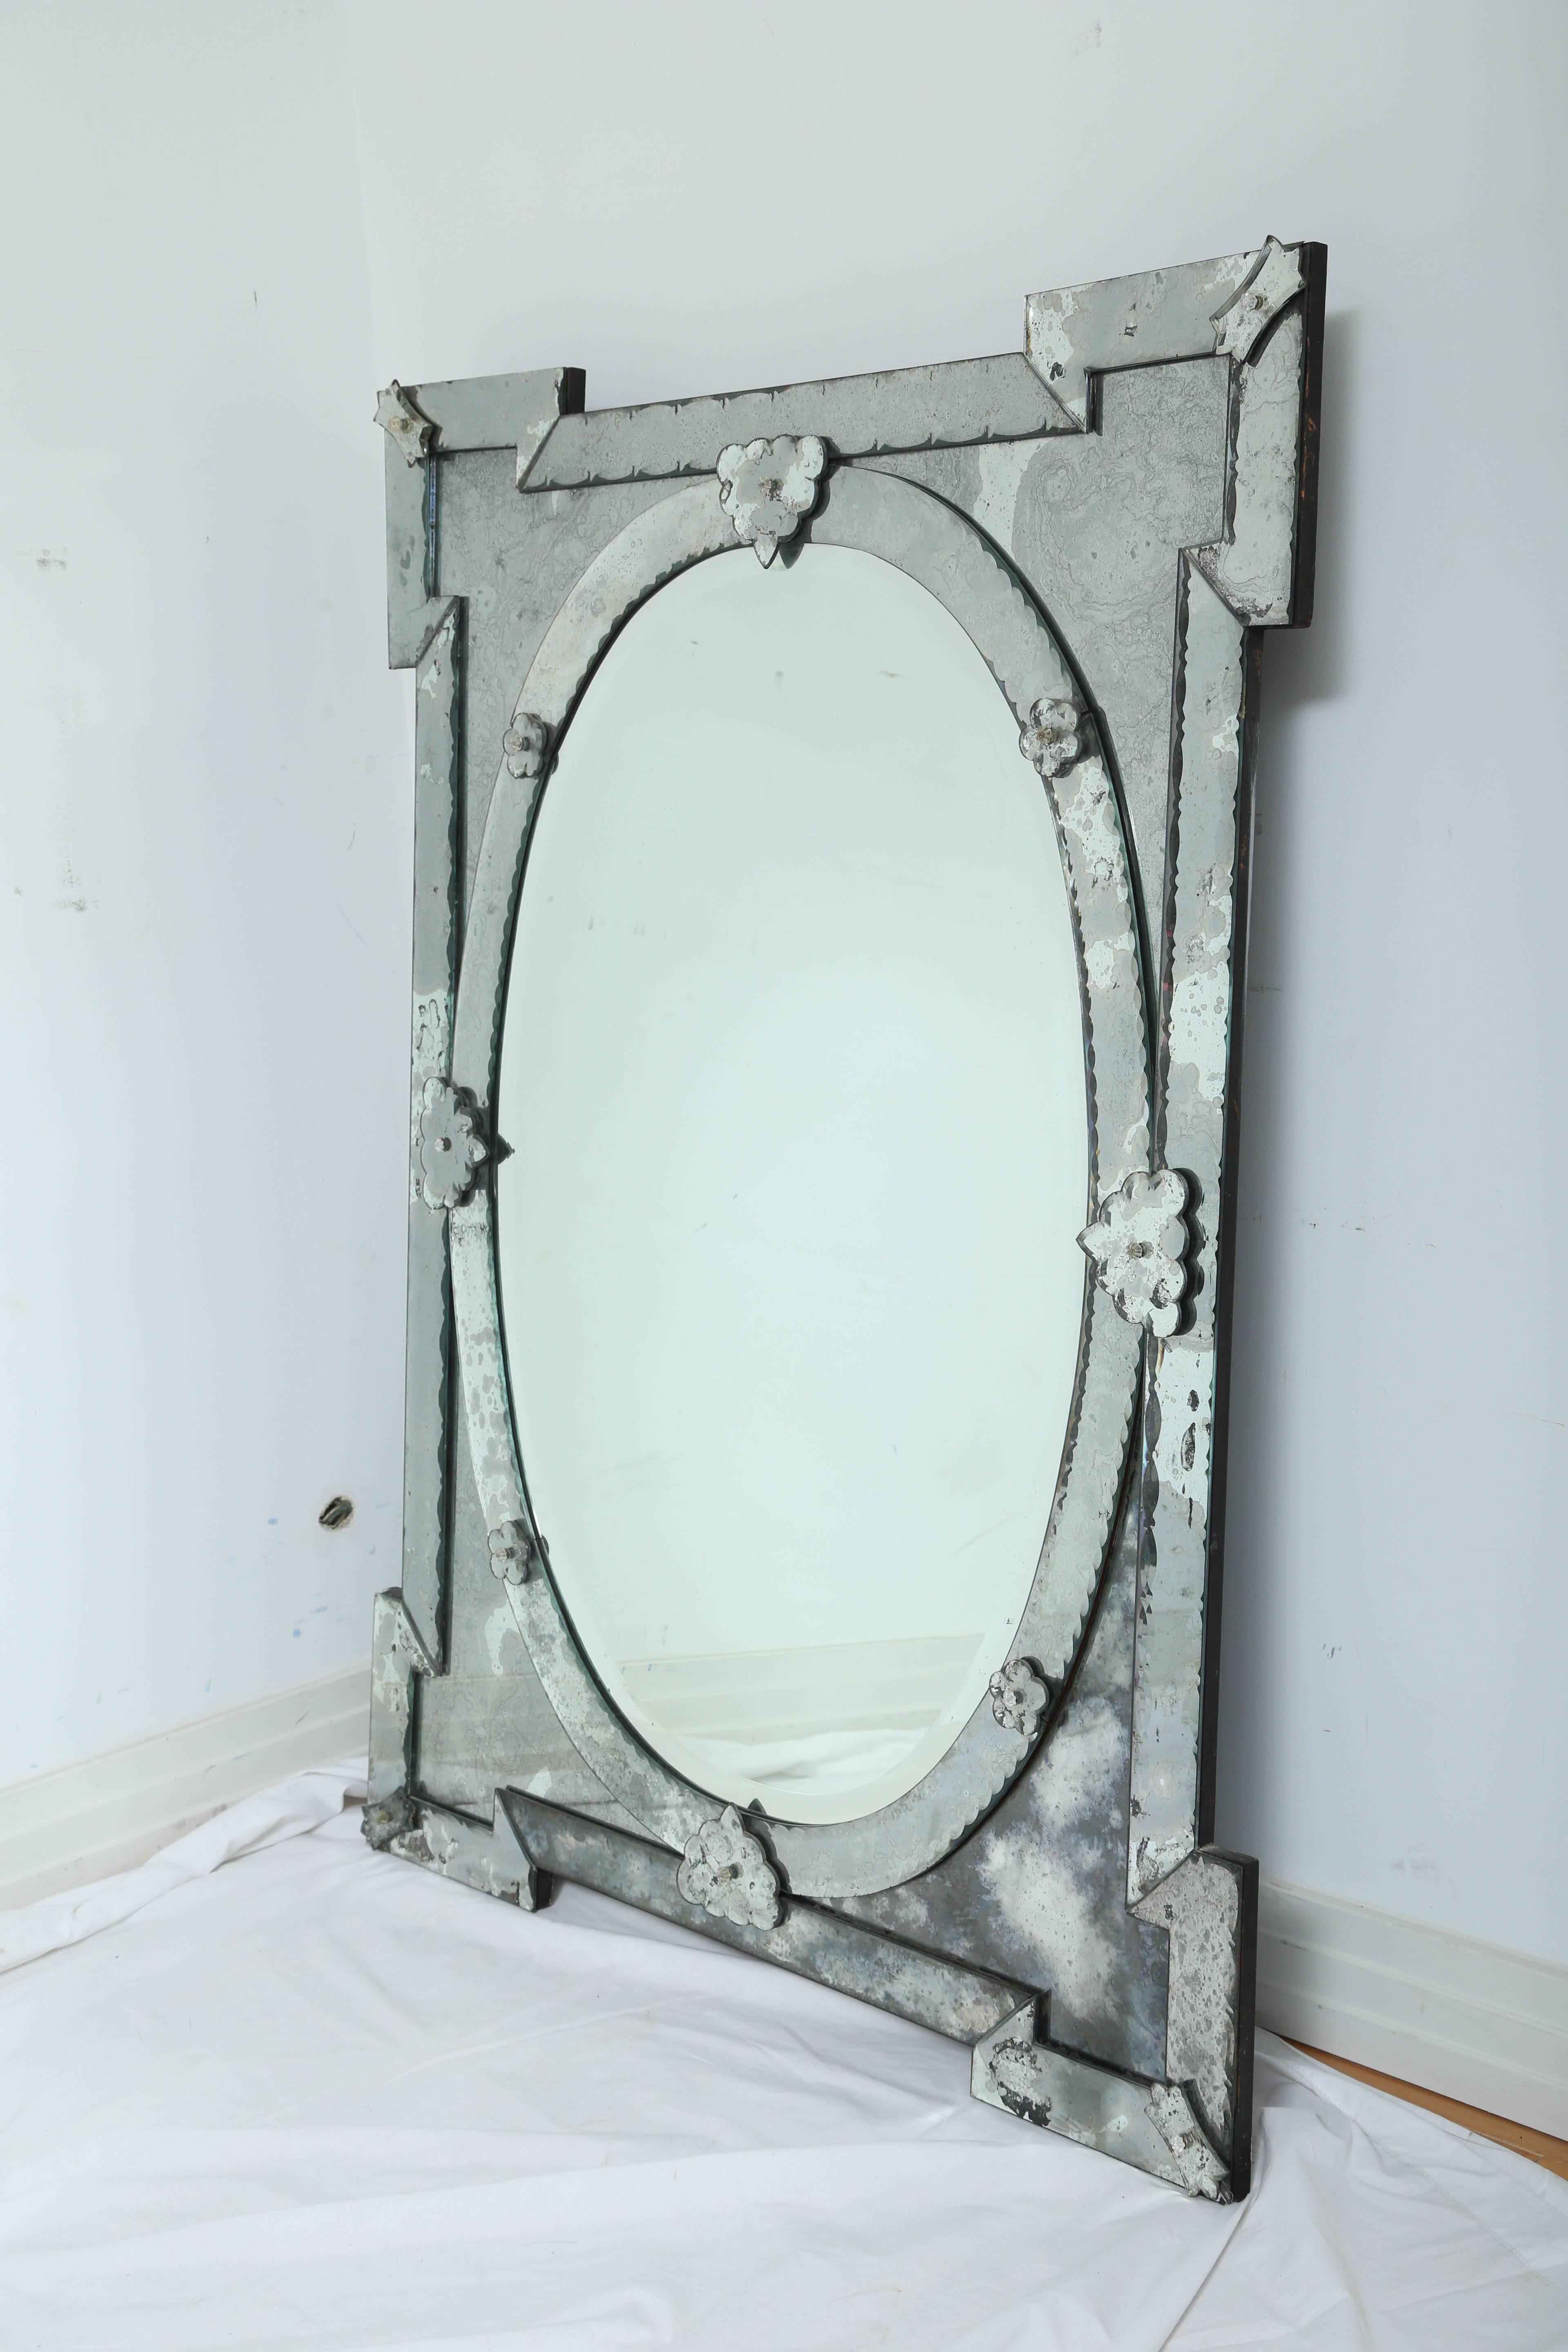 Exquisite large scale Venetian mirror with beveled edges and beautiful hand etched designs throughout. The mirror features a stunning oval center within a shield shaped frame.  Stunning Hollywood Regency, Baroque Revival  design, mixing well with